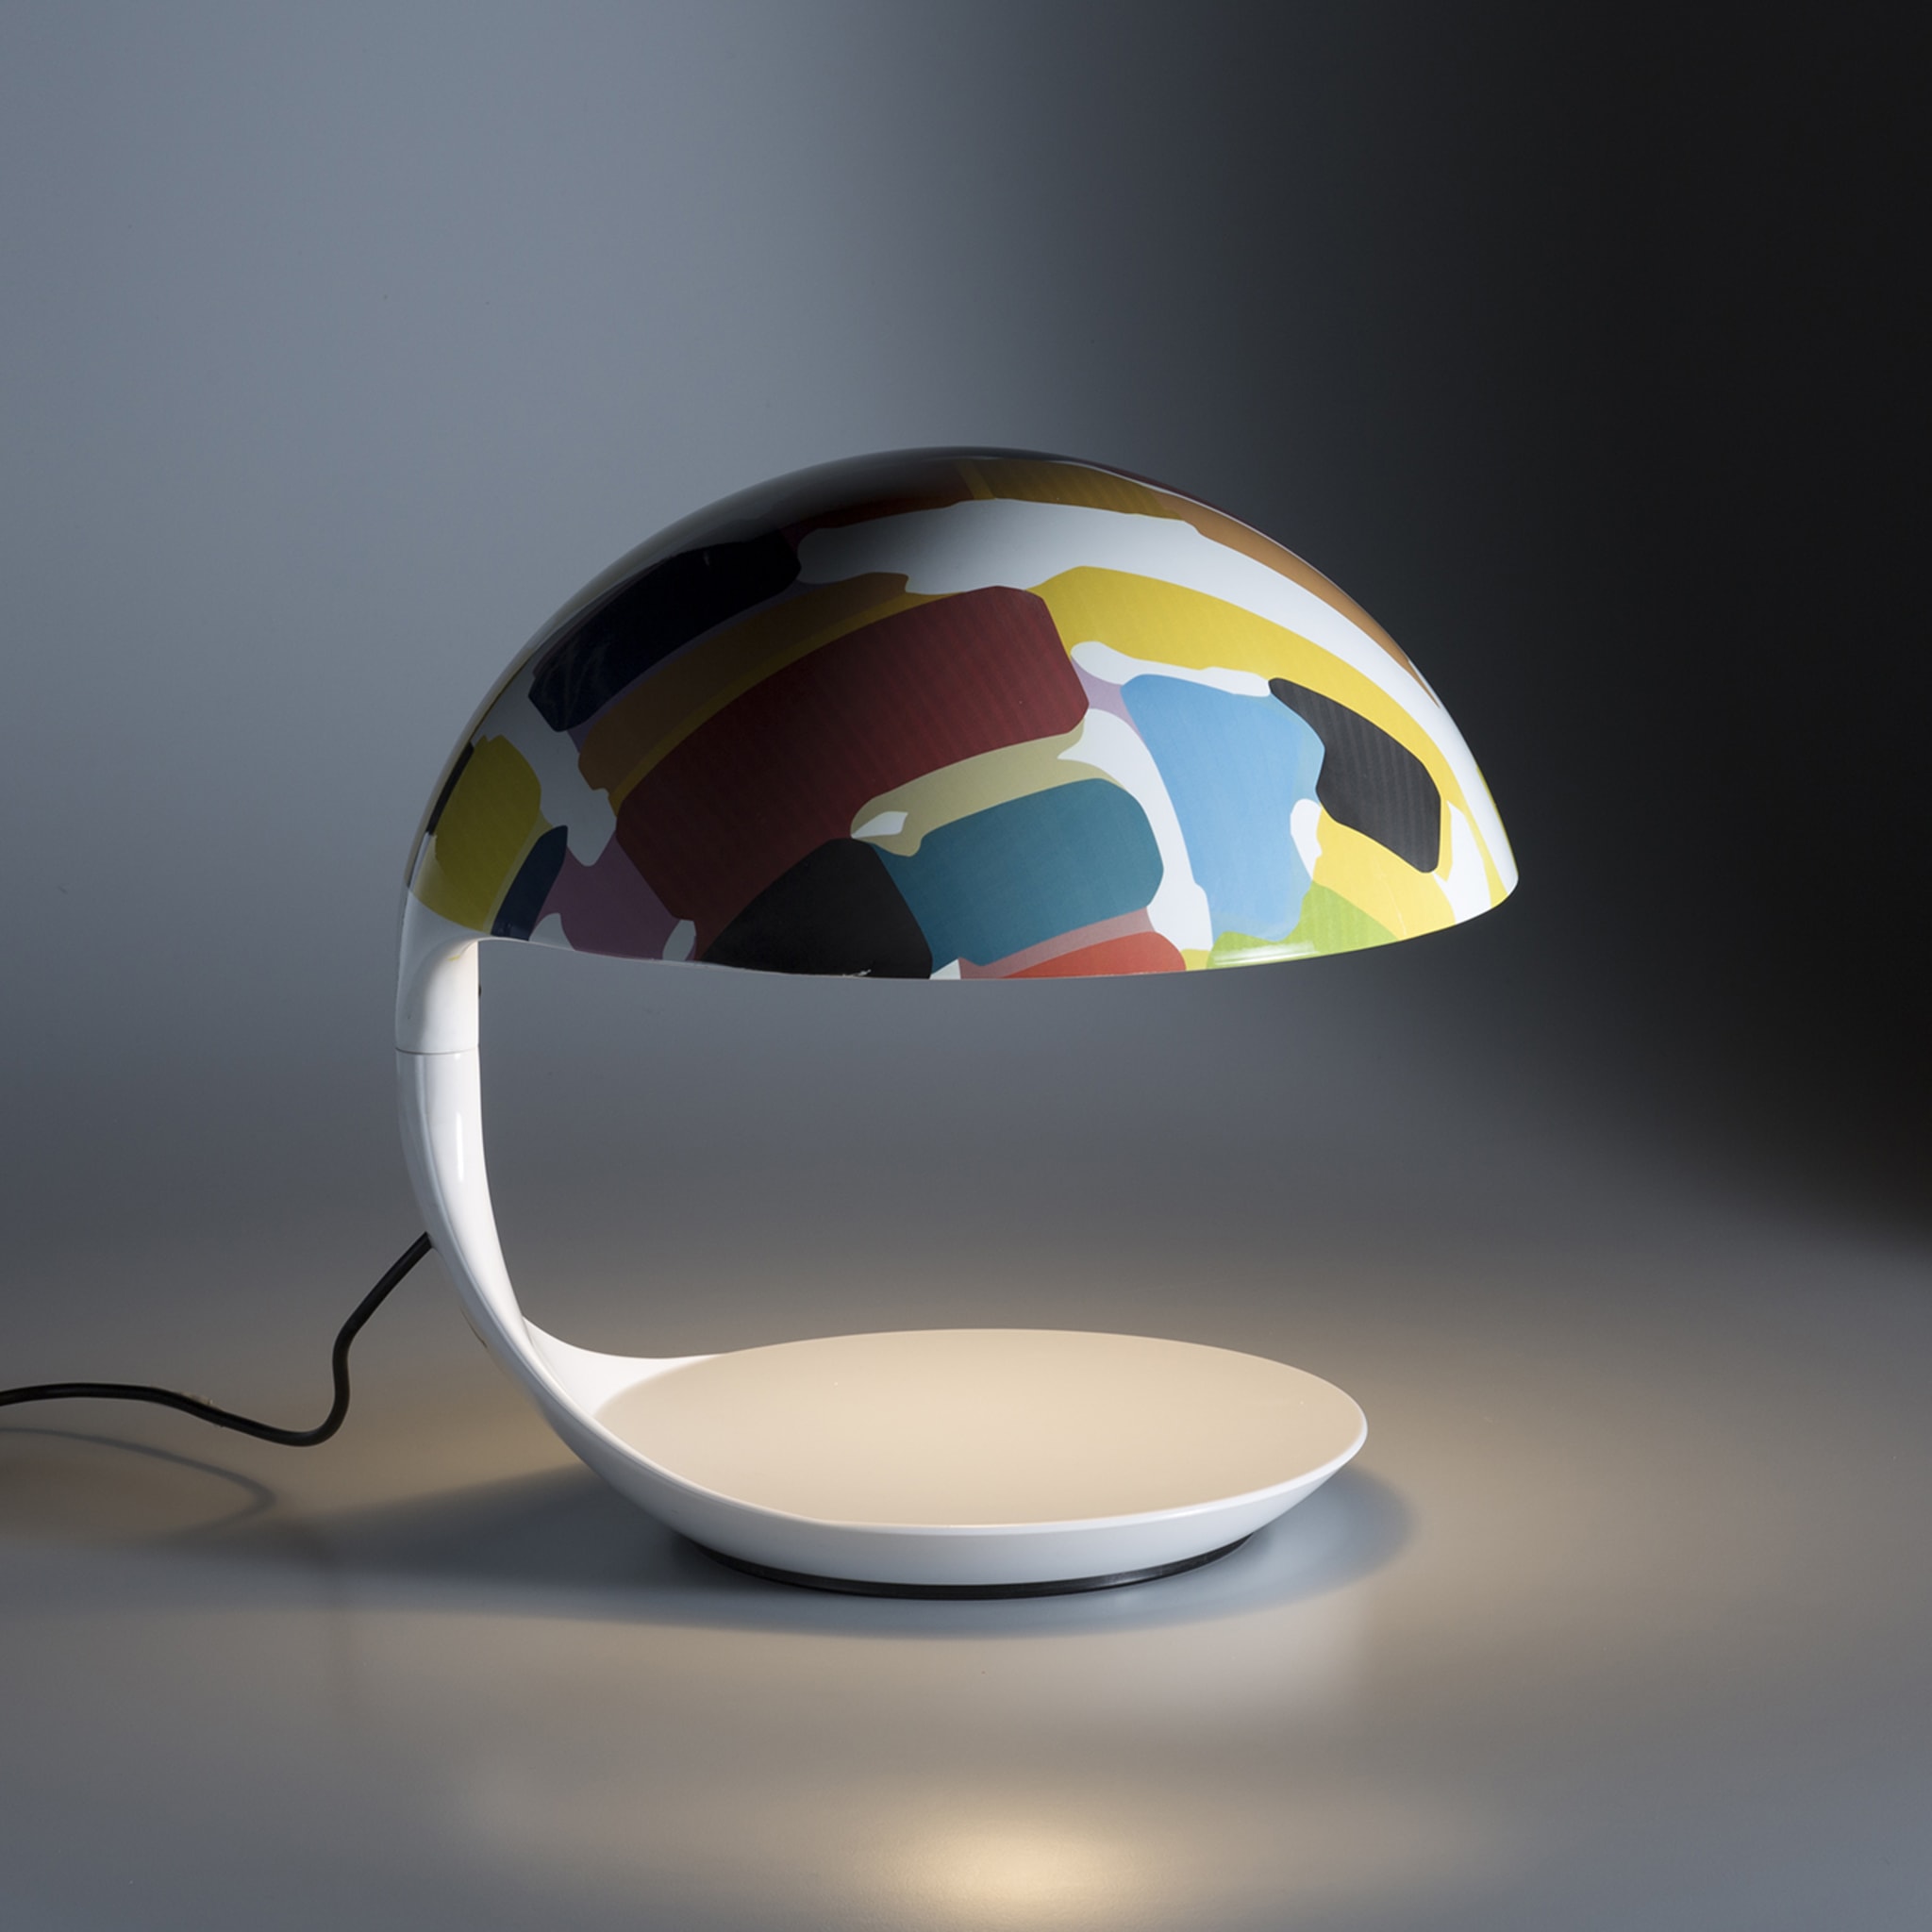 Cobra Texture Polychrome Table Lamp by Michel Bouquillon - Alternative view 3